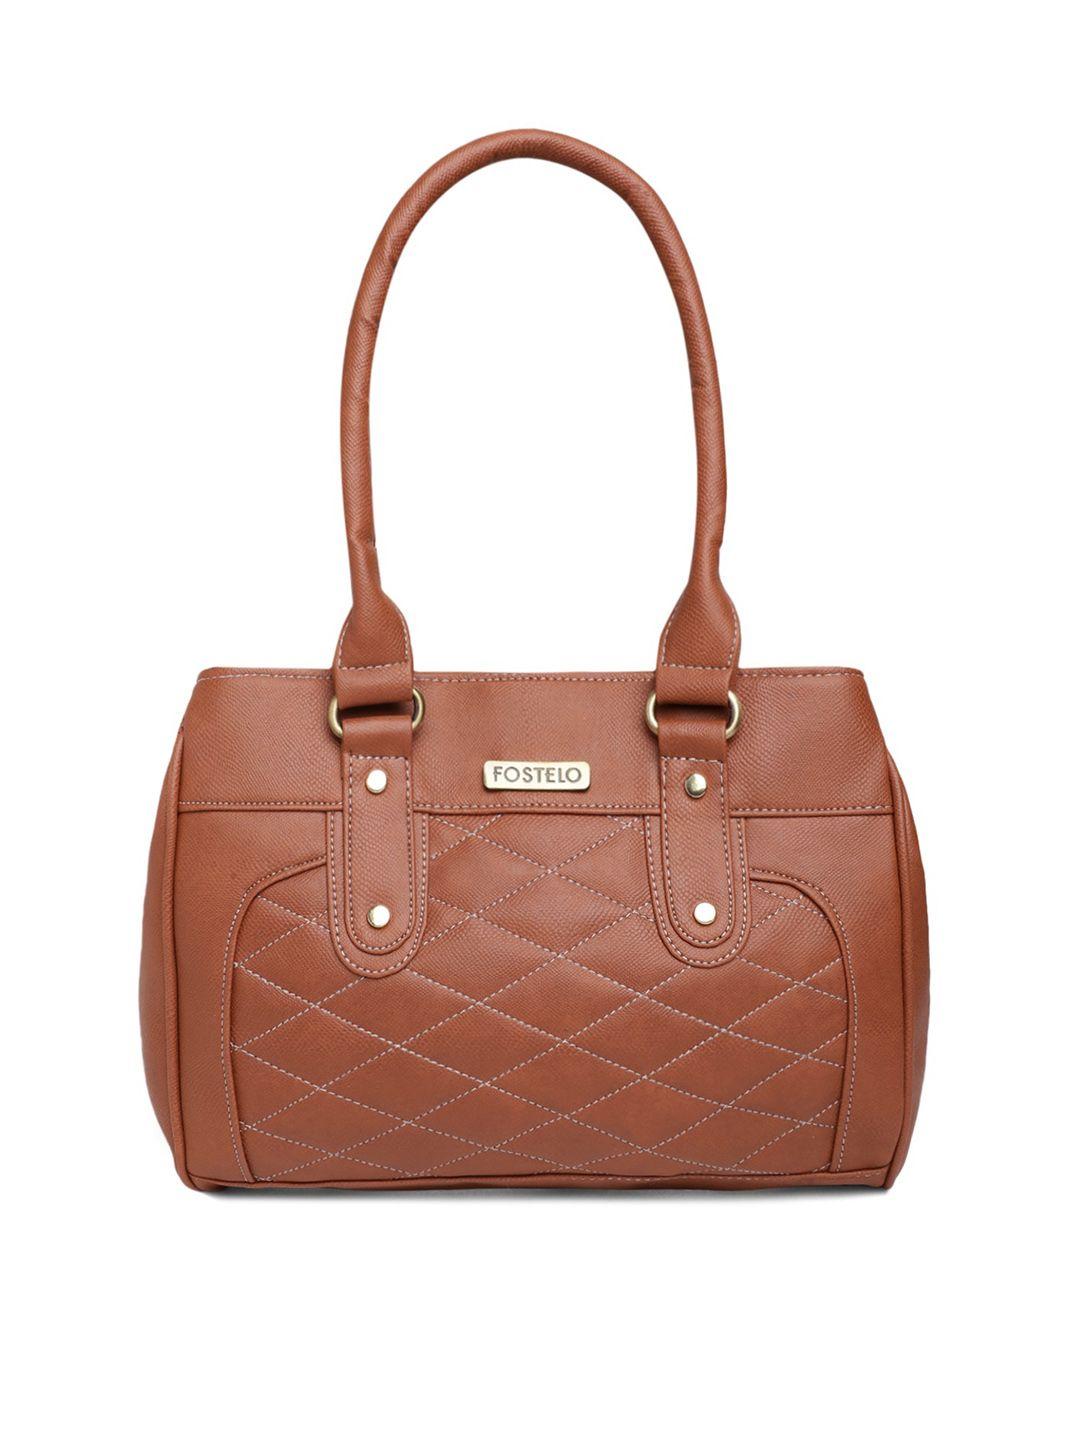 fostelo textured structured handheld bag with quilted